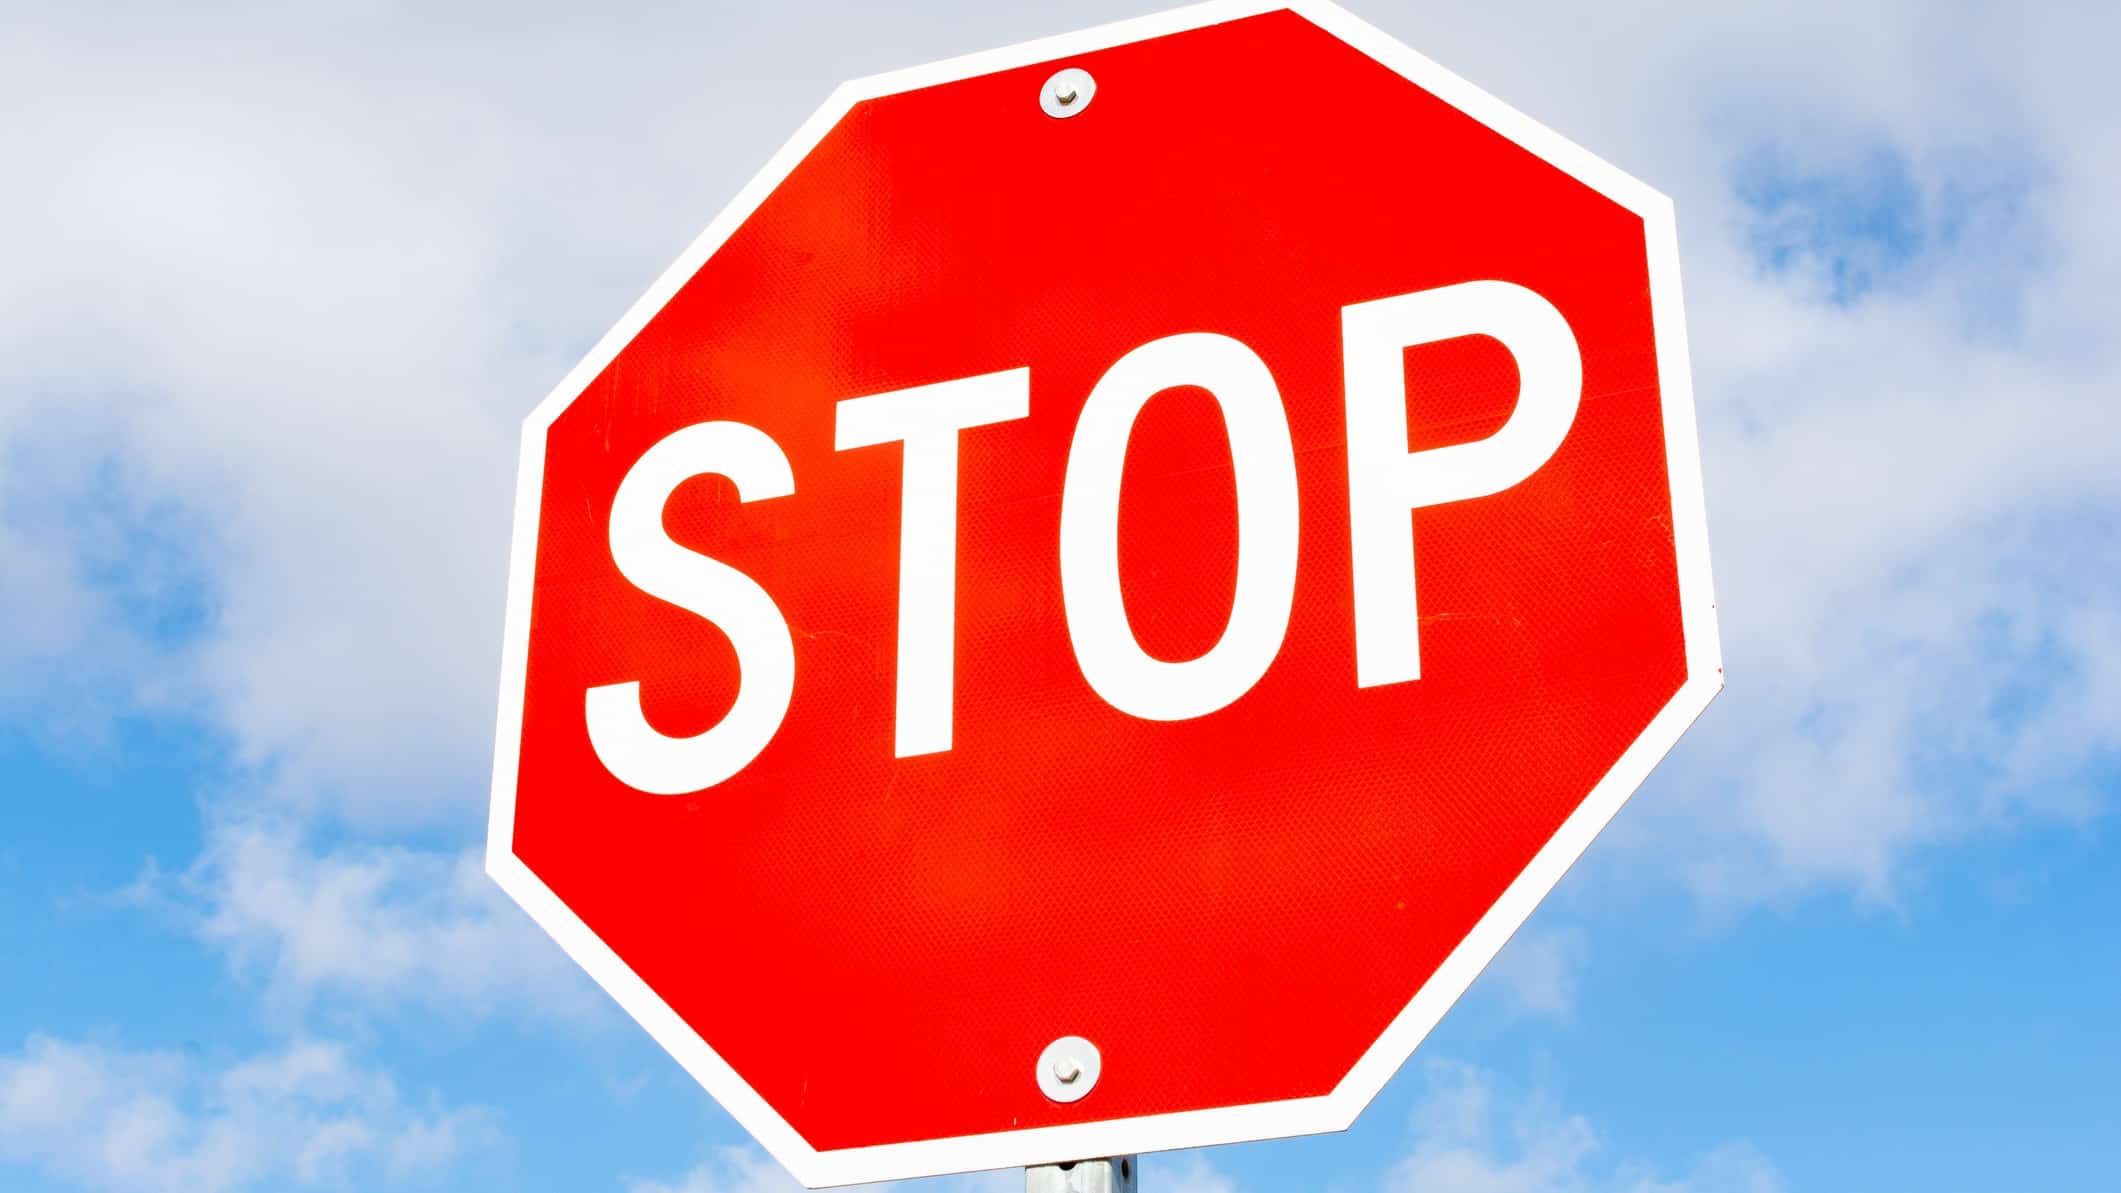 asx share price trading halt represented by stop sign